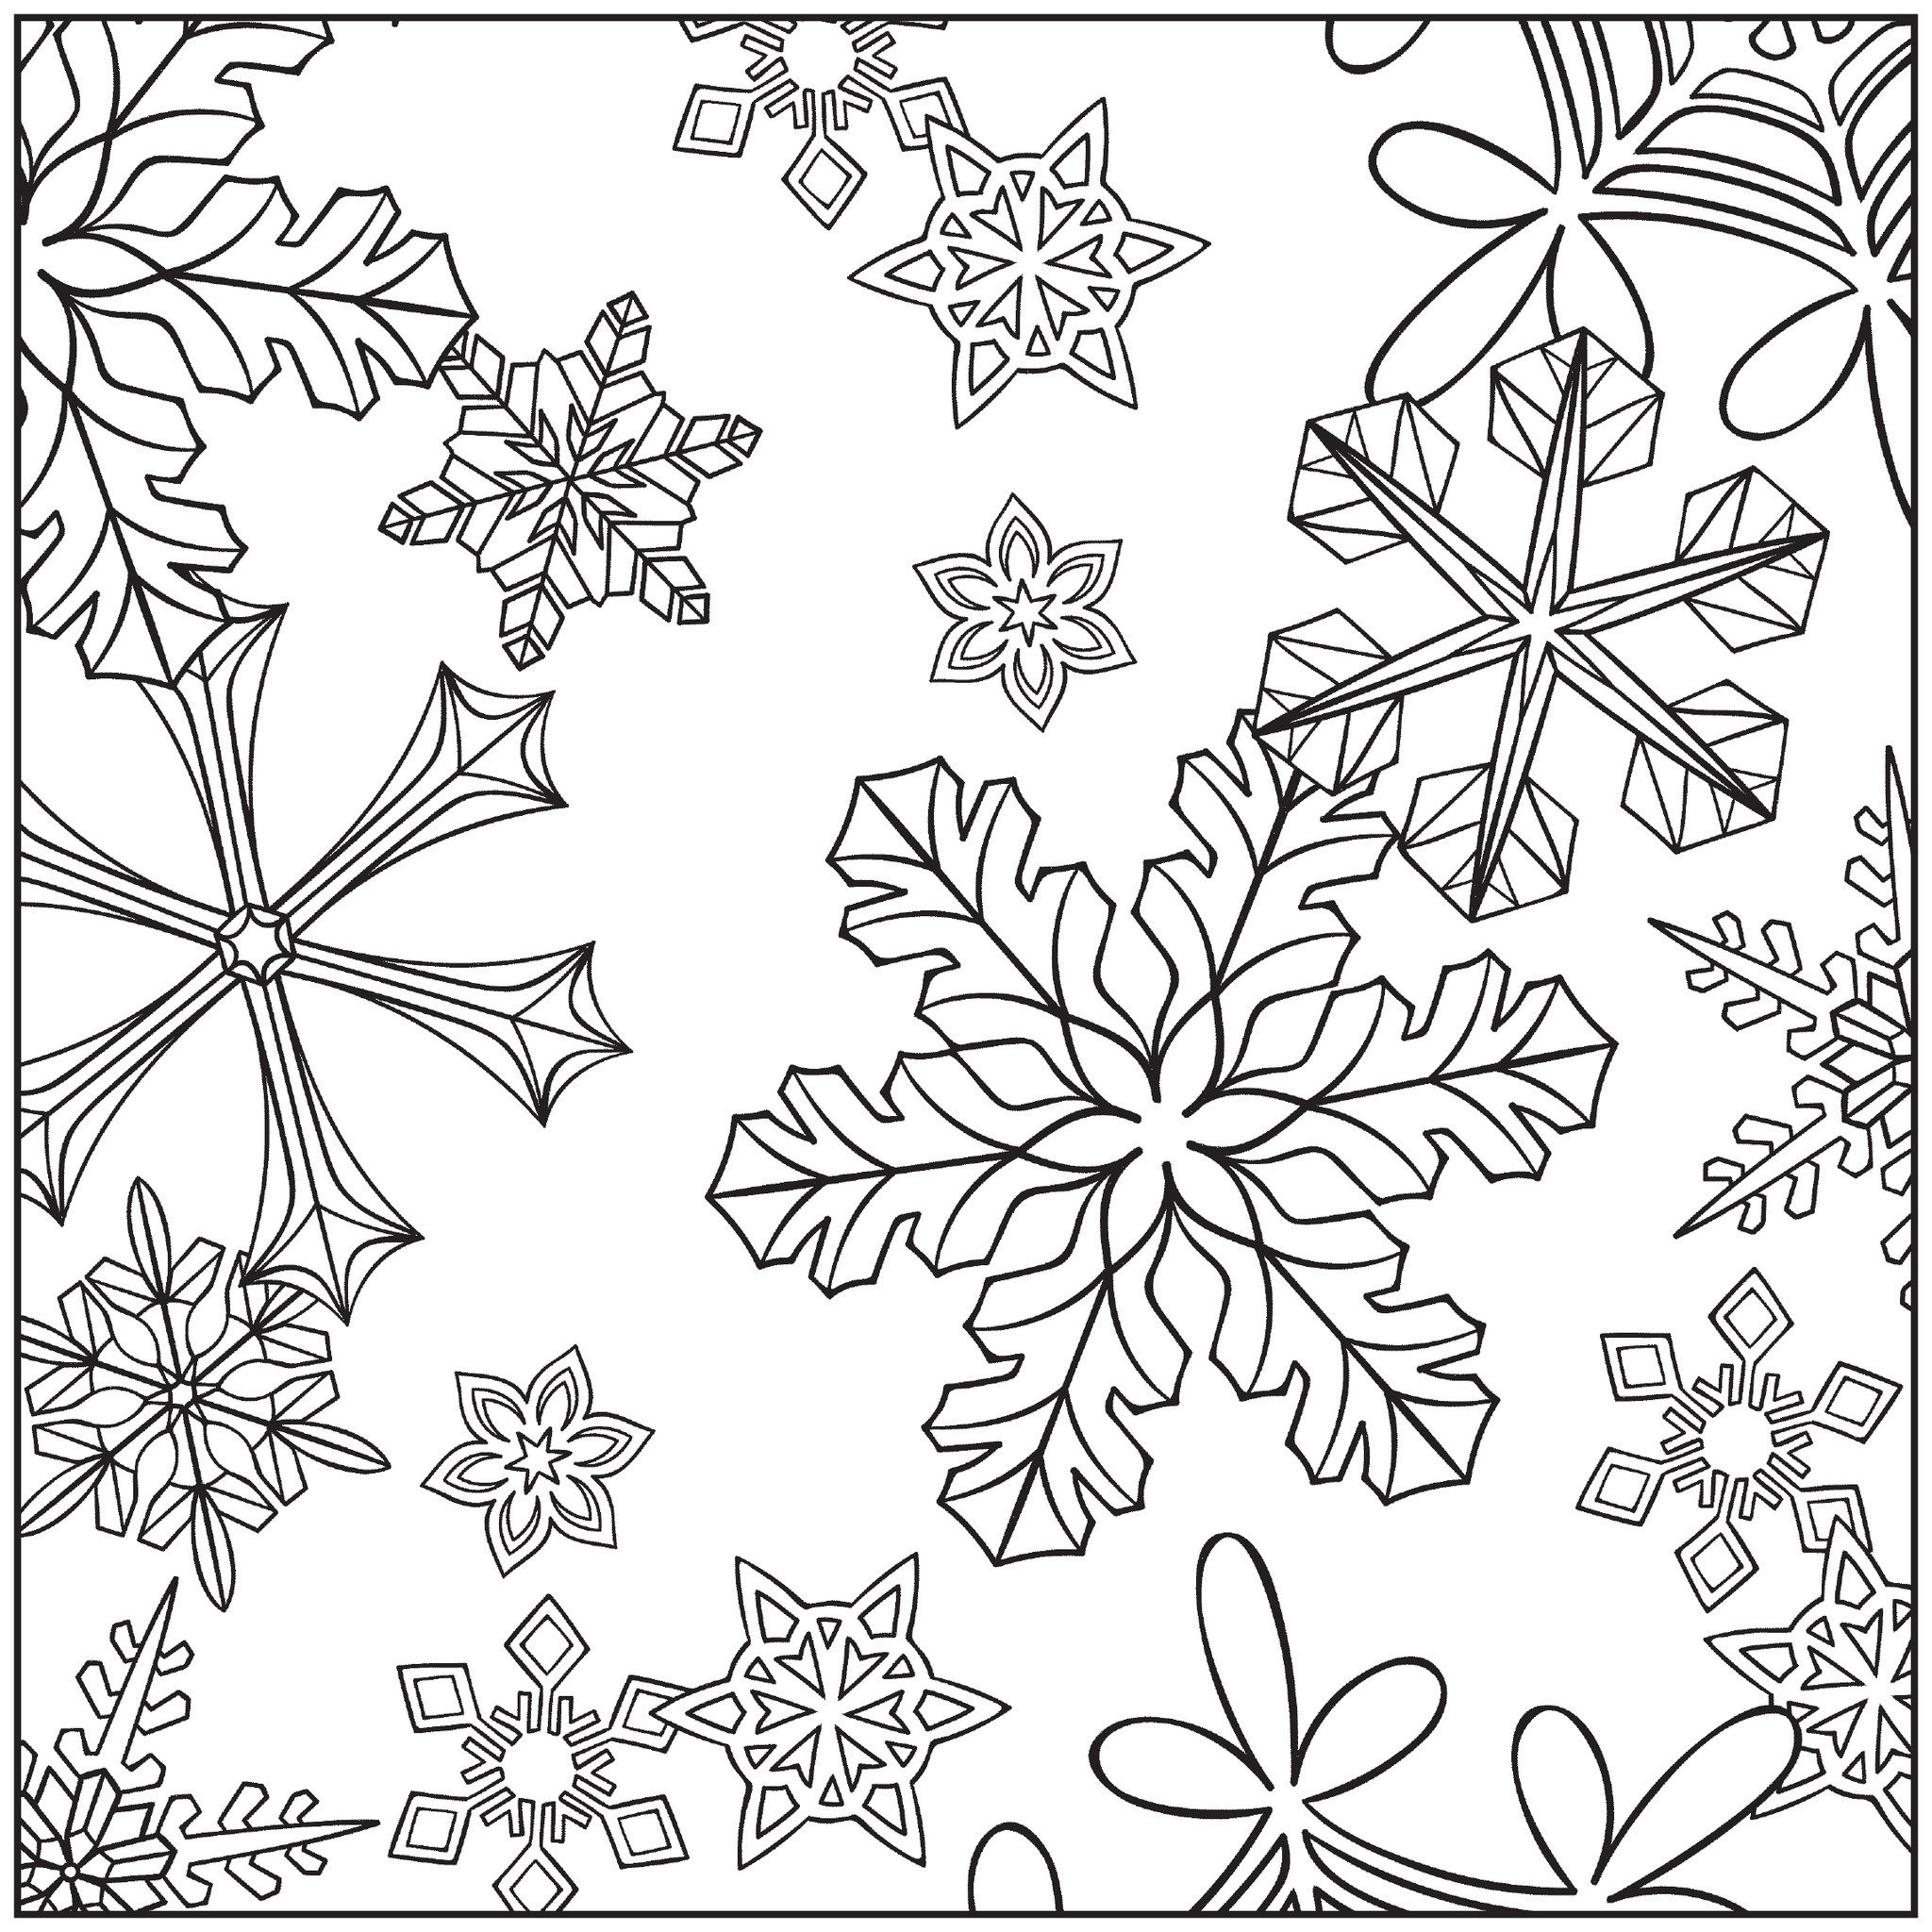 Winter Wonderland Free Coloring Sheets
 Winter Wonderland Adult Coloring Book With Relaxation CD